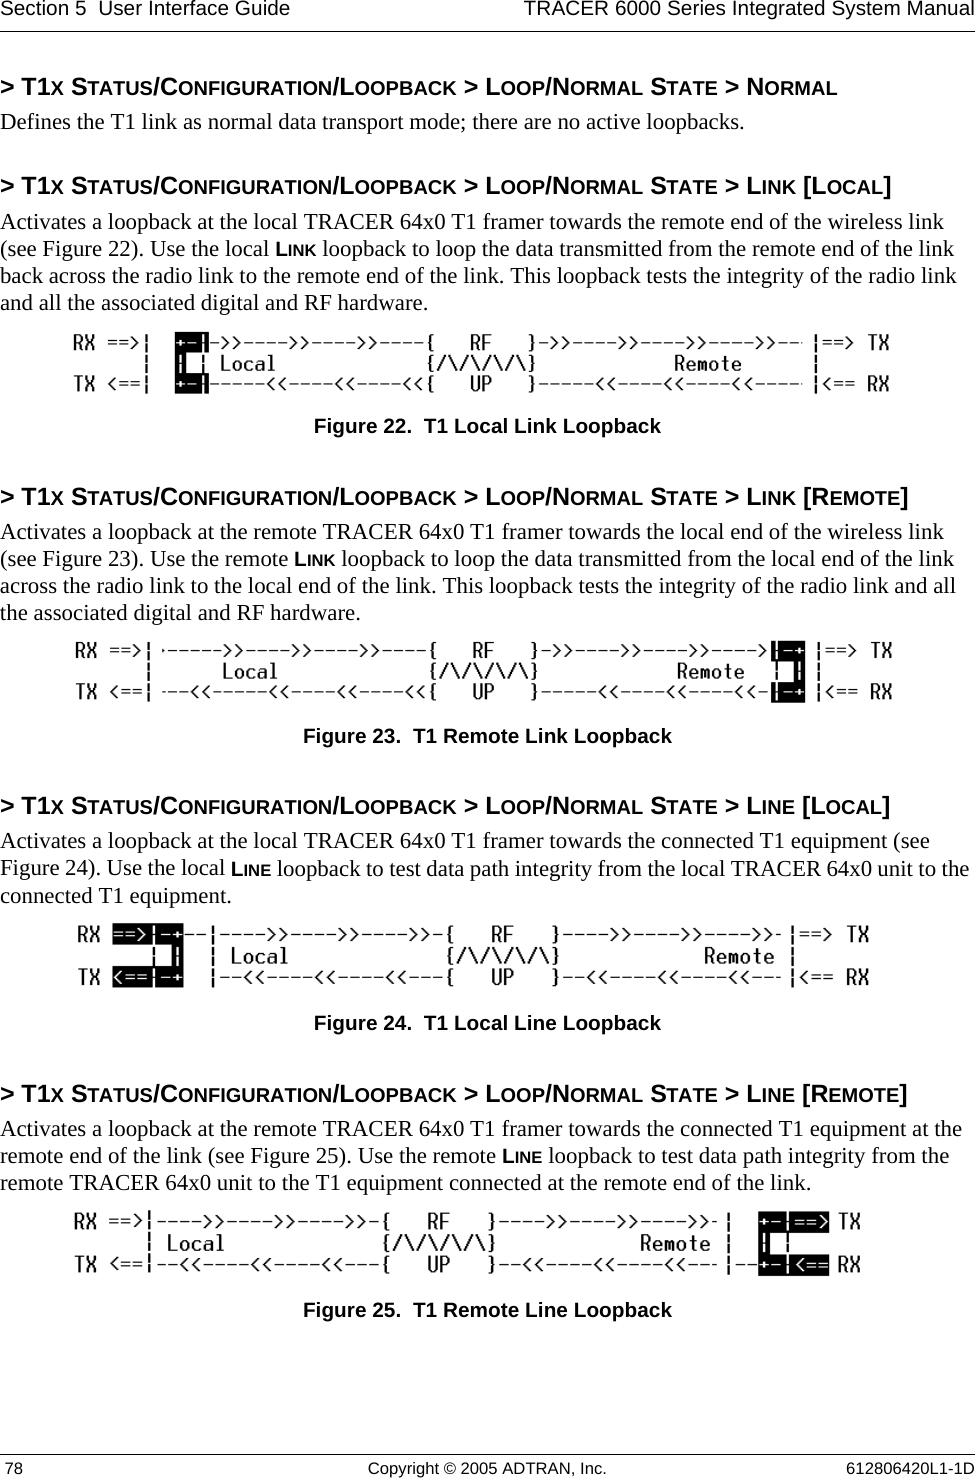 Section 5  User Interface Guide TRACER 6000 Series Integrated System Manual 78 Copyright © 2005 ADTRAN, Inc. 612806420L1-1D&gt; T1X STATUS/CONFIGURATION/LOOPBACK &gt; LOOP/NORMAL STATE &gt; NORMALDefines the T1 link as normal data transport mode; there are no active loopbacks.&gt; T1X STATUS/CONFIGURATION/LOOPBACK &gt; LOOP/NORMAL STATE &gt; LINK [LOCAL]Activates a loopback at the local TRACER 64x0 T1 framer towards the remote end of the wireless link (see Figure 22). Use the local LINK loopback to loop the data transmitted from the remote end of the link back across the radio link to the remote end of the link. This loopback tests the integrity of the radio link and all the associated digital and RF hardware.Figure 22.  T1 Local Link Loopback&gt; T1X STATUS/CONFIGURATION/LOOPBACK &gt; LOOP/NORMAL STATE &gt; LINK [REMOTE]Activates a loopback at the remote TRACER 64x0 T1 framer towards the local end of the wireless link (see Figure 23). Use the remote LINK loopback to loop the data transmitted from the local end of the link across the radio link to the local end of the link. This loopback tests the integrity of the radio link and all the associated digital and RF hardware.Figure 23.  T1 Remote Link Loopback&gt; T1X STATUS/CONFIGURATION/LOOPBACK &gt; LOOP/NORMAL STATE &gt; LINE [LOCAL]Activates a loopback at the local TRACER 64x0 T1 framer towards the connected T1 equipment (see Figure 24). Use the local LINE loopback to test data path integrity from the local TRACER 64x0 unit to the connected T1 equipment.Figure 24.  T1 Local Line Loopback&gt; T1X STATUS/CONFIGURATION/LOOPBACK &gt; LOOP/NORMAL STATE &gt; LINE [REMOTE]Activates a loopback at the remote TRACER 64x0 T1 framer towards the connected T1 equipment at the remote end of the link (see Figure 25). Use the remote LINE loopback to test data path integrity from the remote TRACER 64x0 unit to the T1 equipment connected at the remote end of the link.Figure 25.  T1 Remote Line Loopback